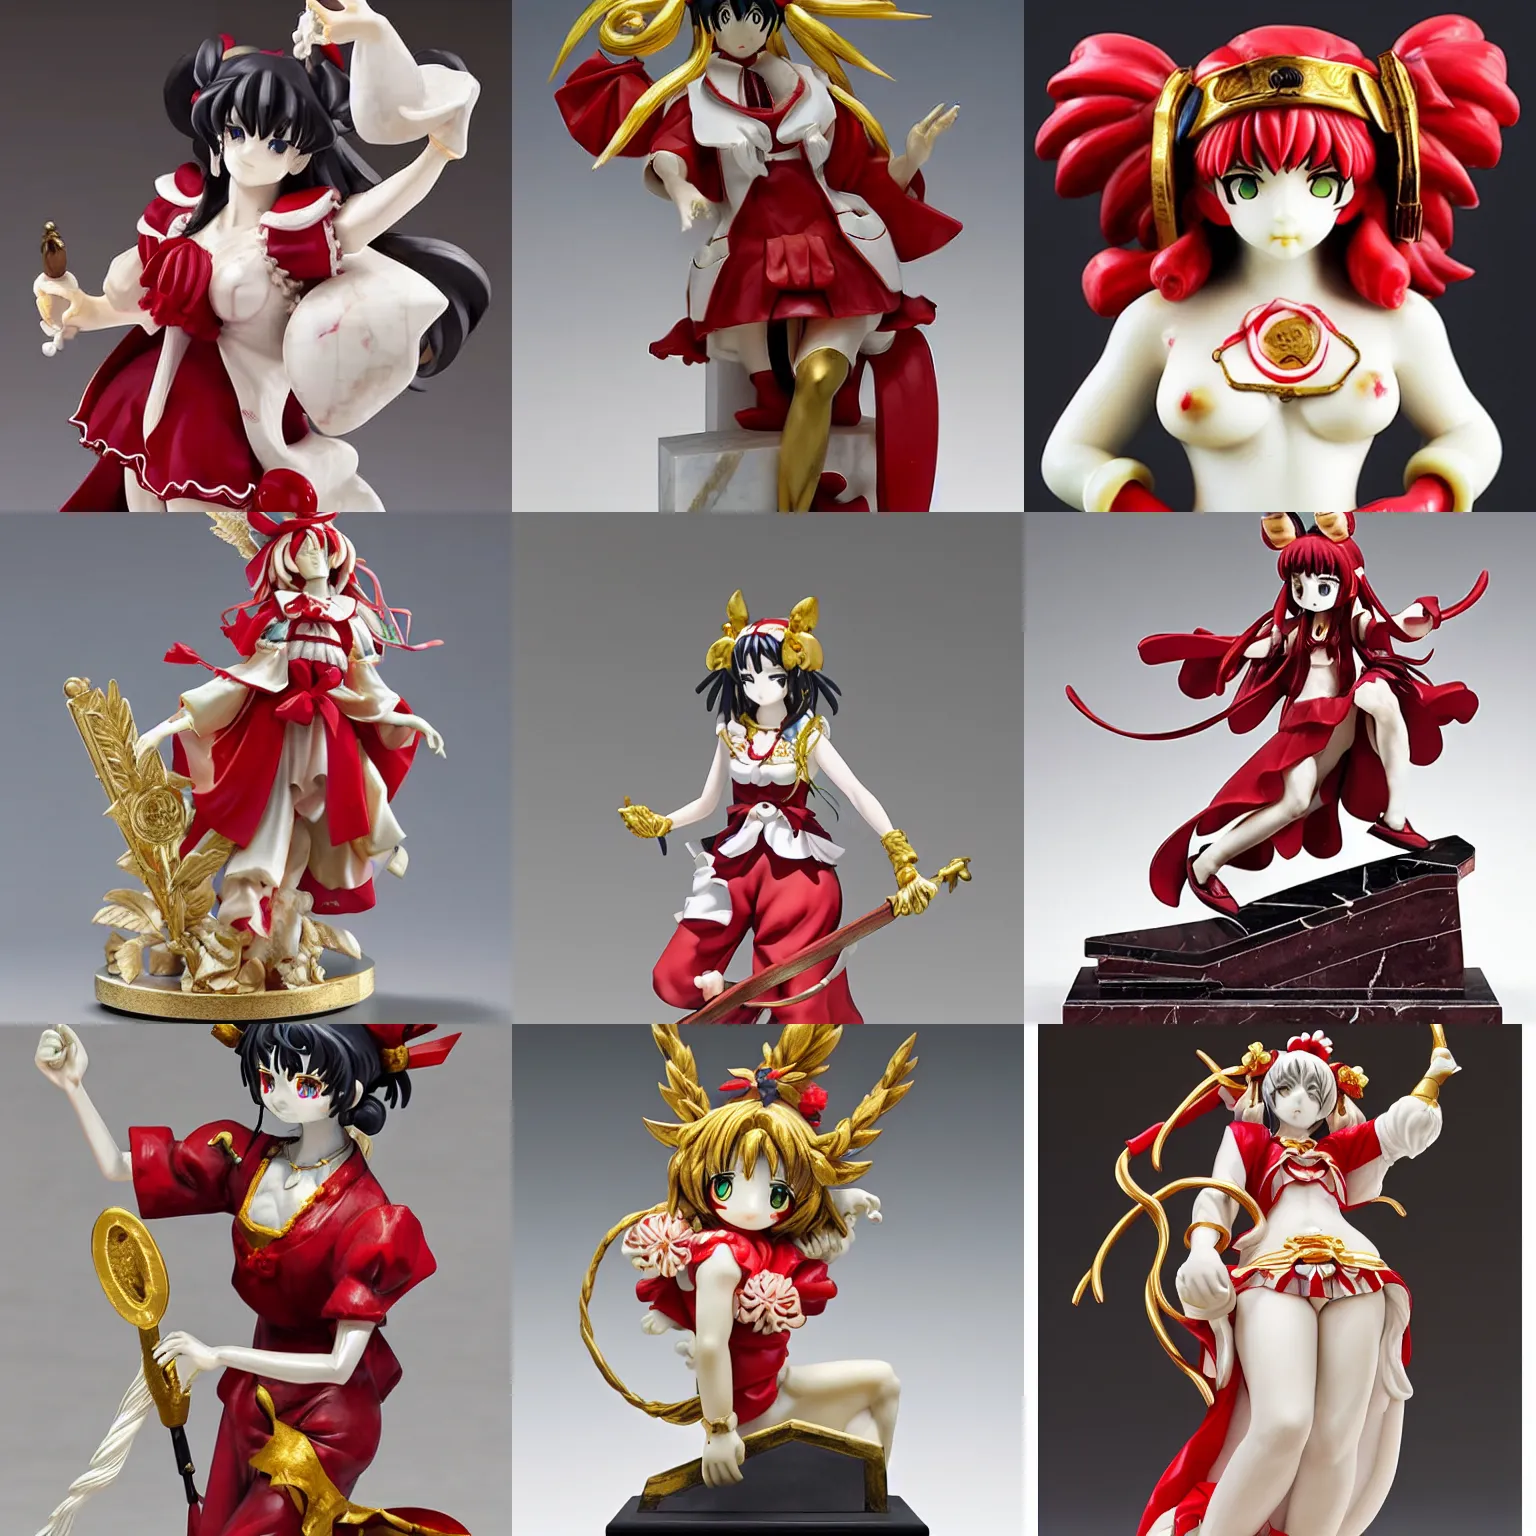 Prompt: a sculpture of reimu hakurei, marble, gold, masterpiece, anatomically correct, intricate detail